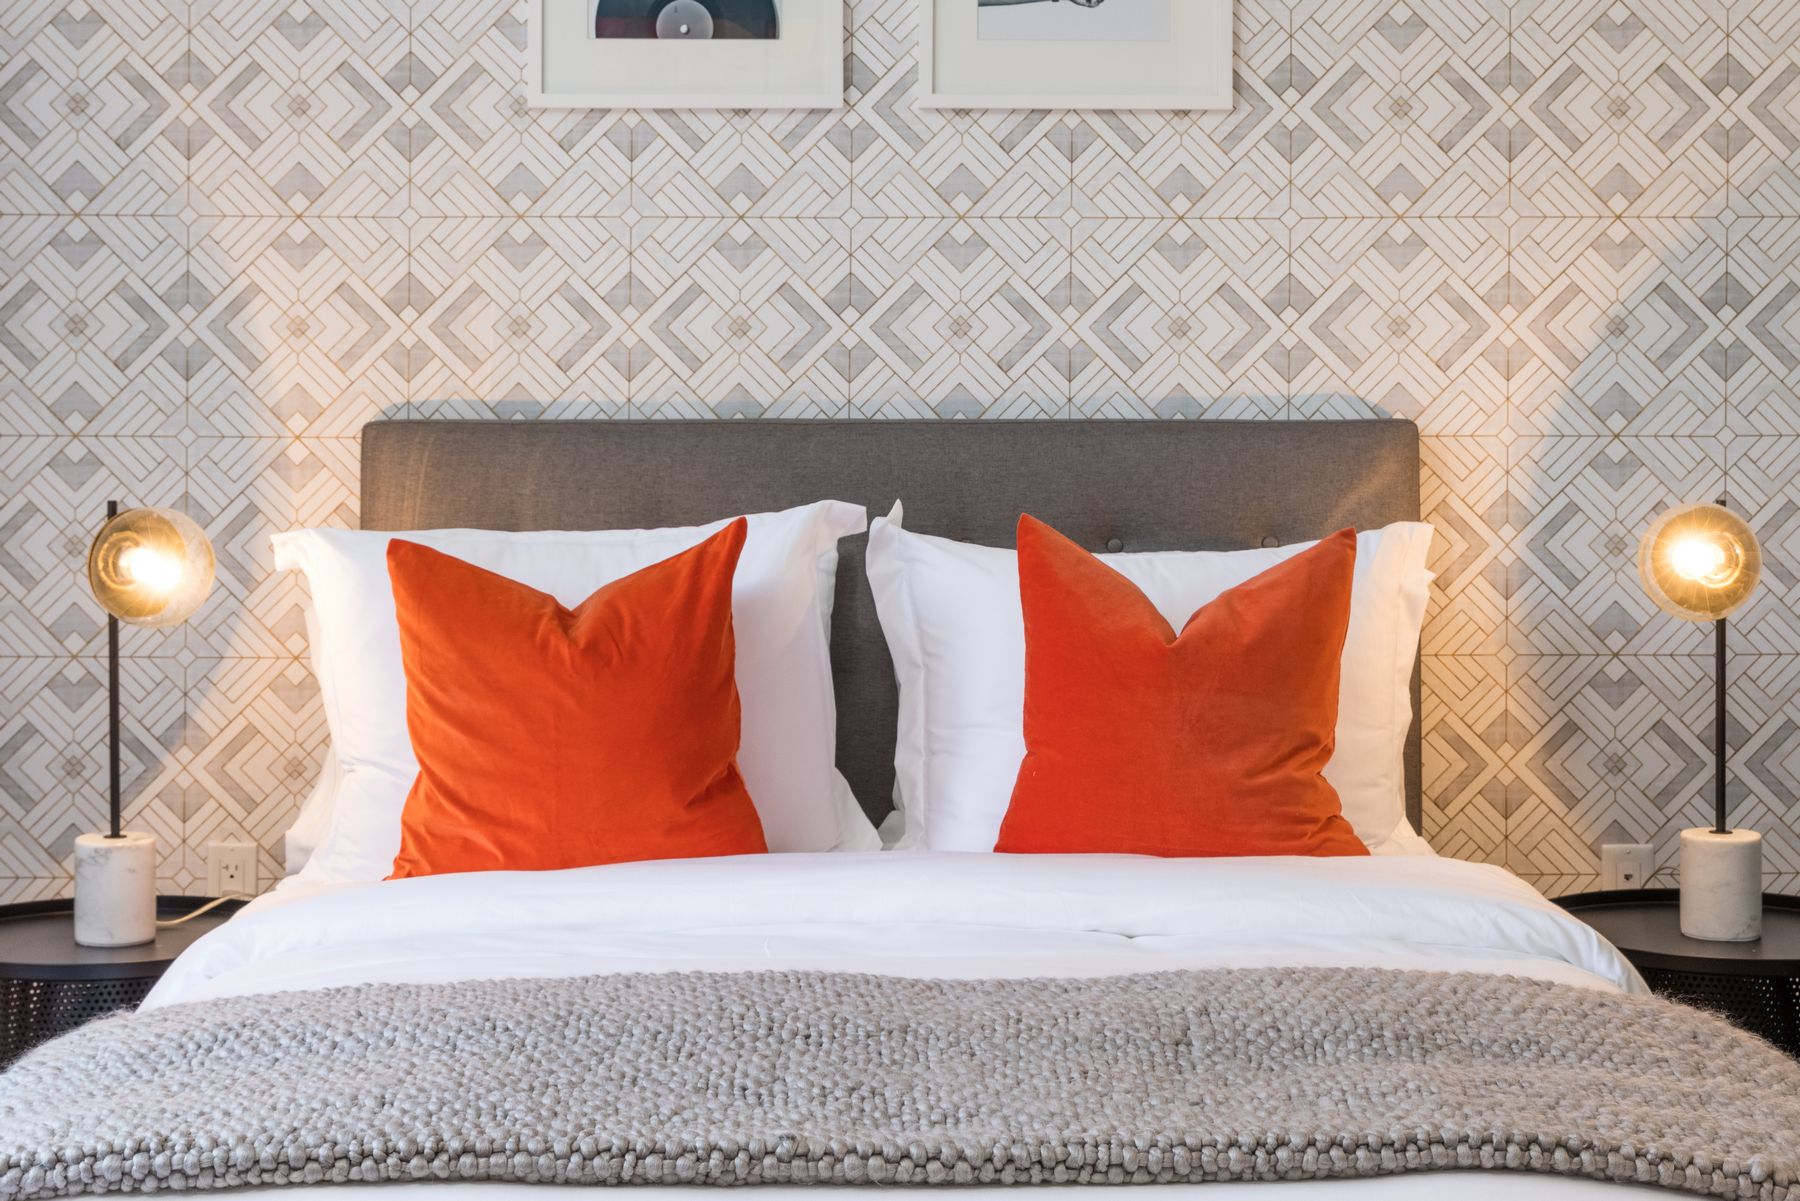 Detail shot of bed with white sheets, duvet and pillows, orange accent pillows, grayish blanket, gray fabric headboard, twin nightstands with light on each side, gray and white patterned wallpaper accent wall behind with frames